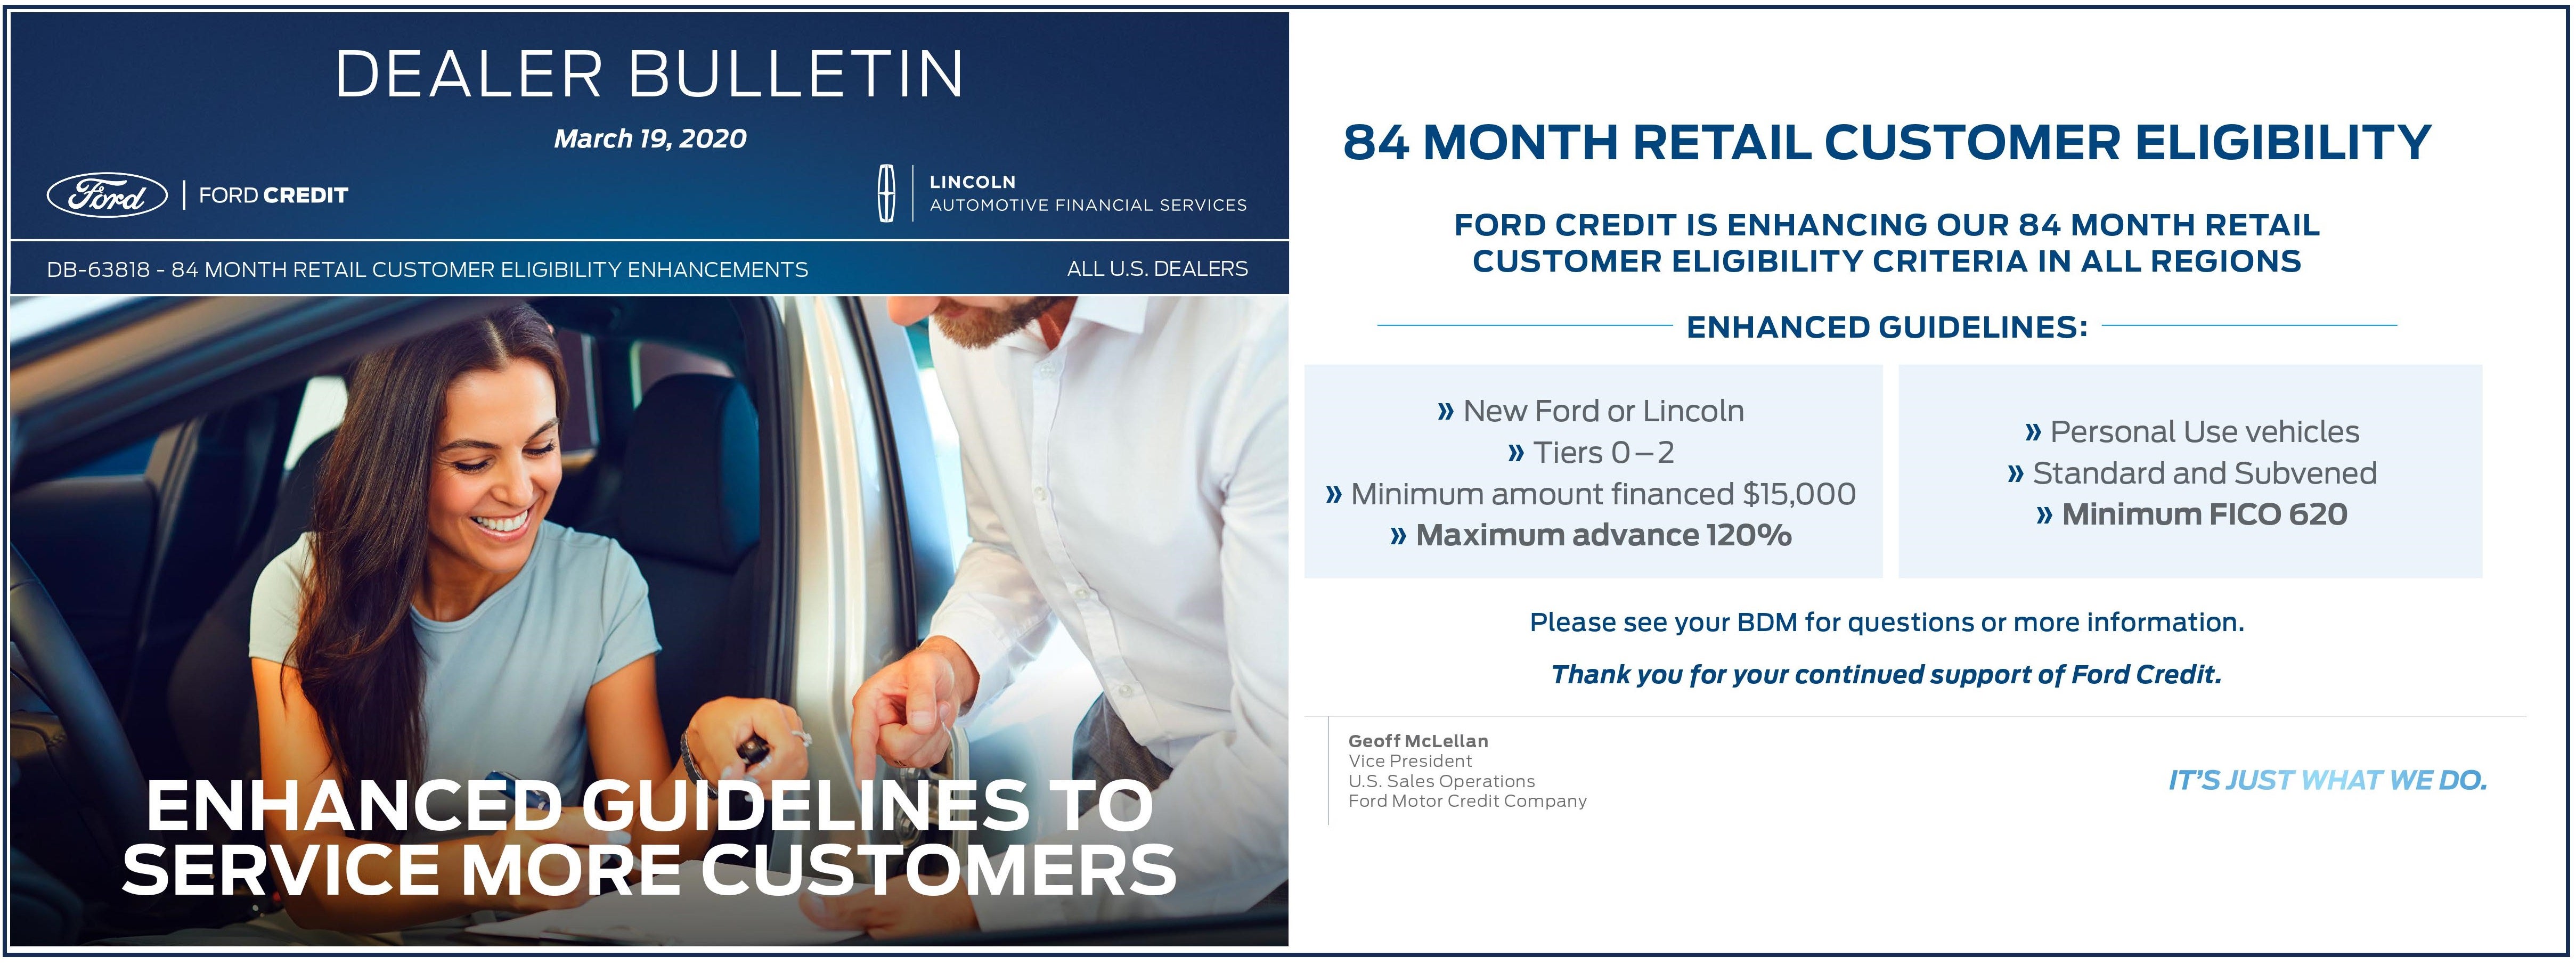 84 month retail customer eligibility